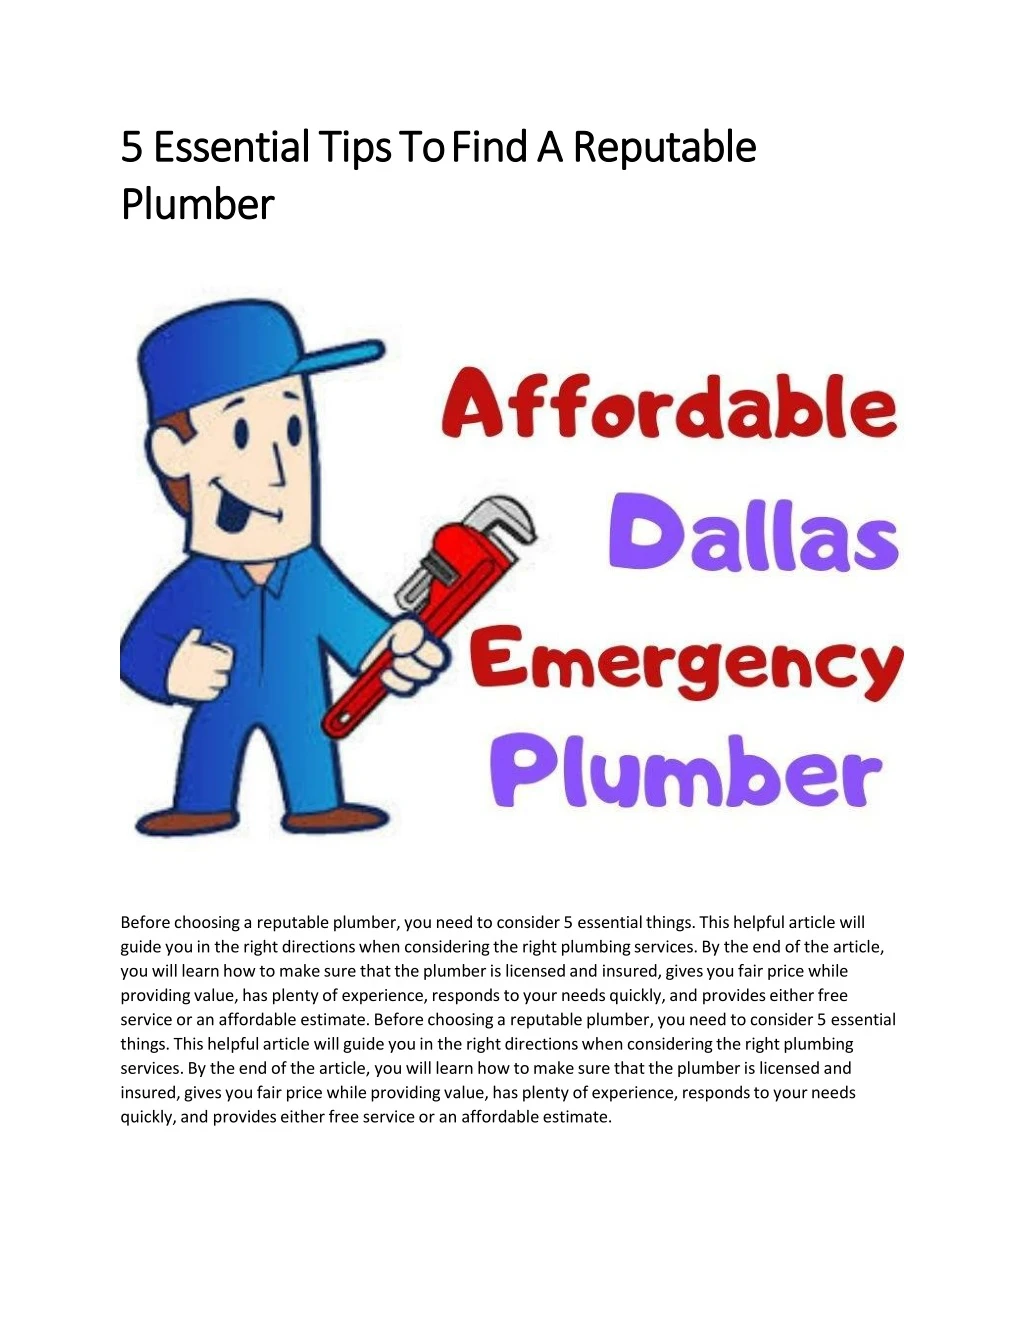 5 essential tips to find a reputable plumber